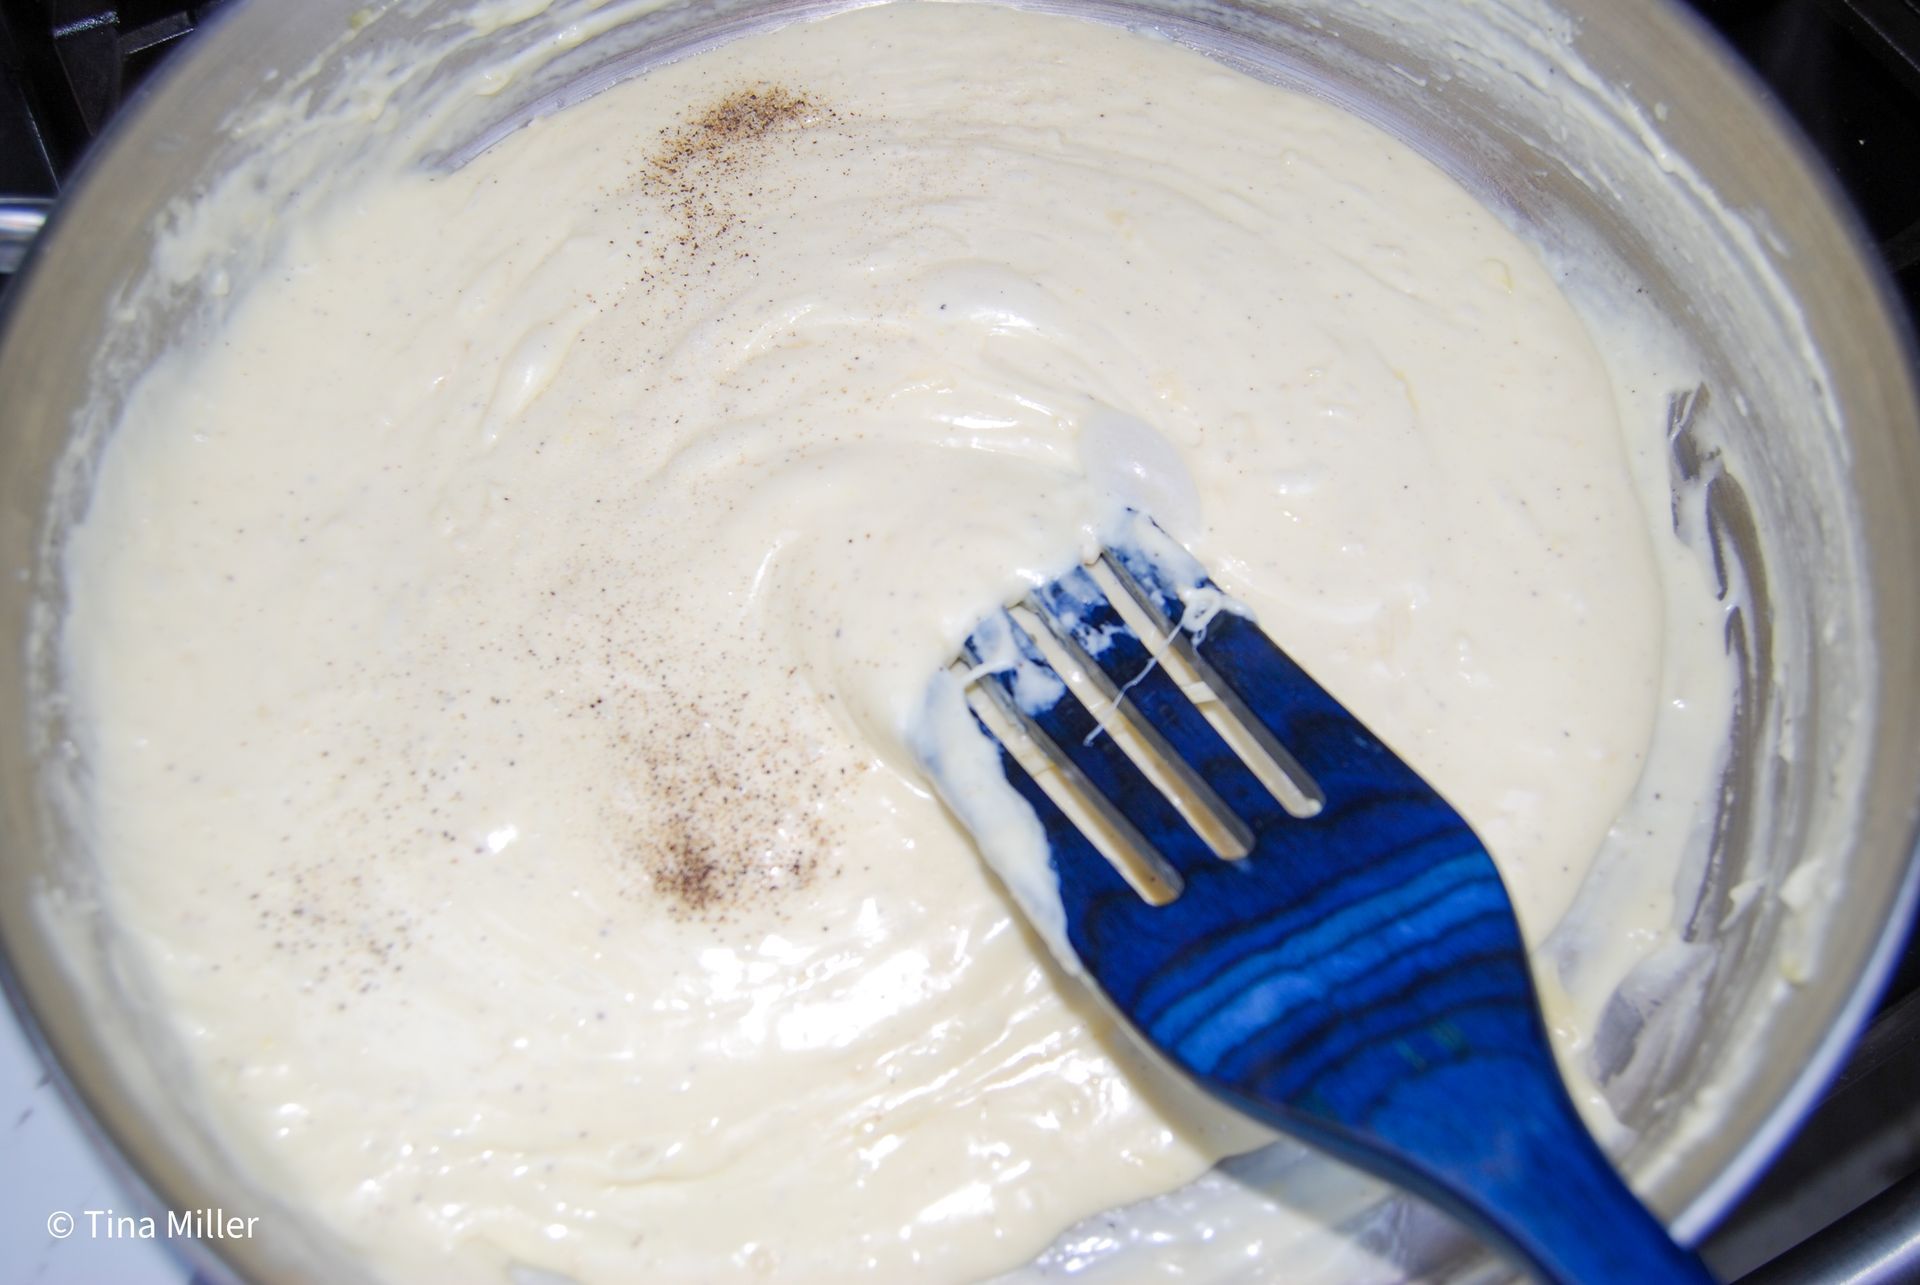 A creamy cheese sauce mixture with added pepper being stirred with a blue wooden spatula.